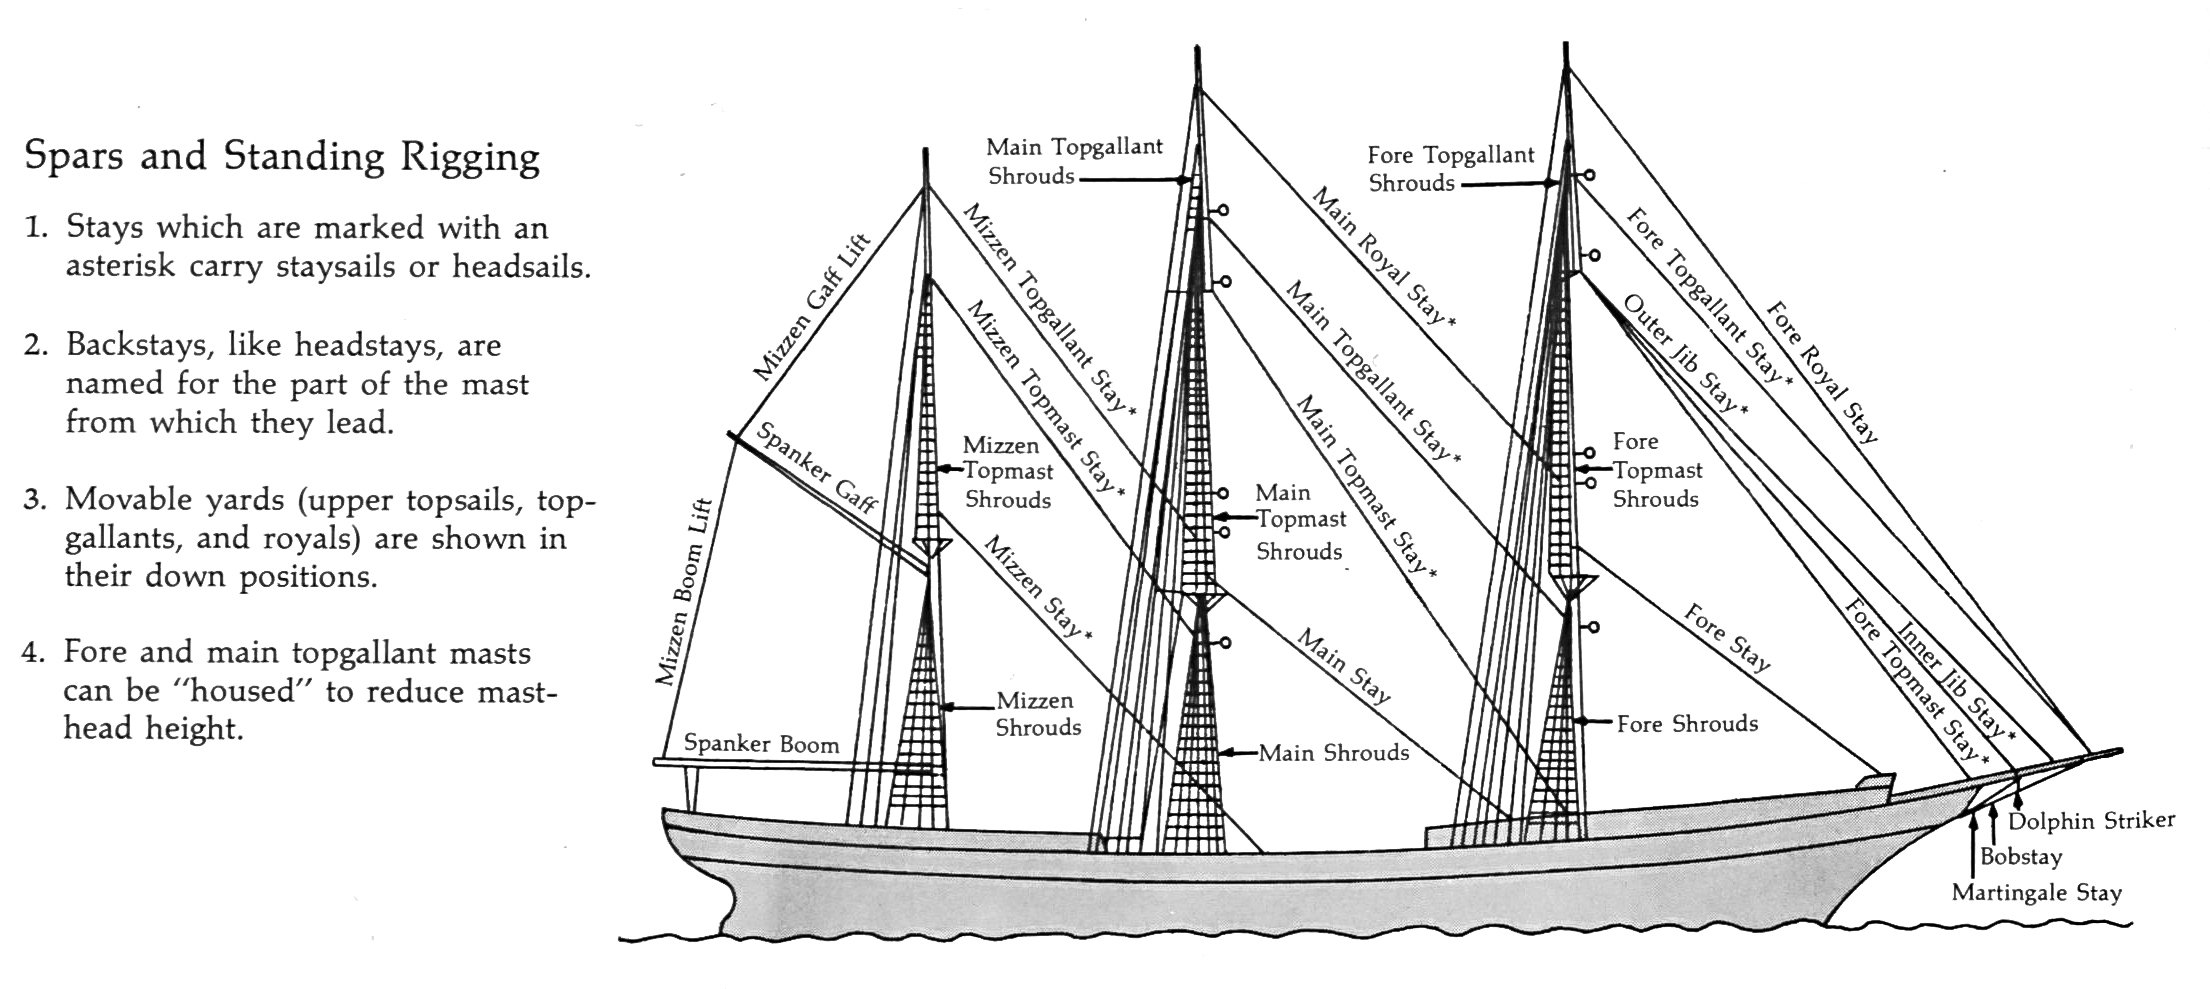 Diagram of USCGC Eagle Spars and Standing Rigging